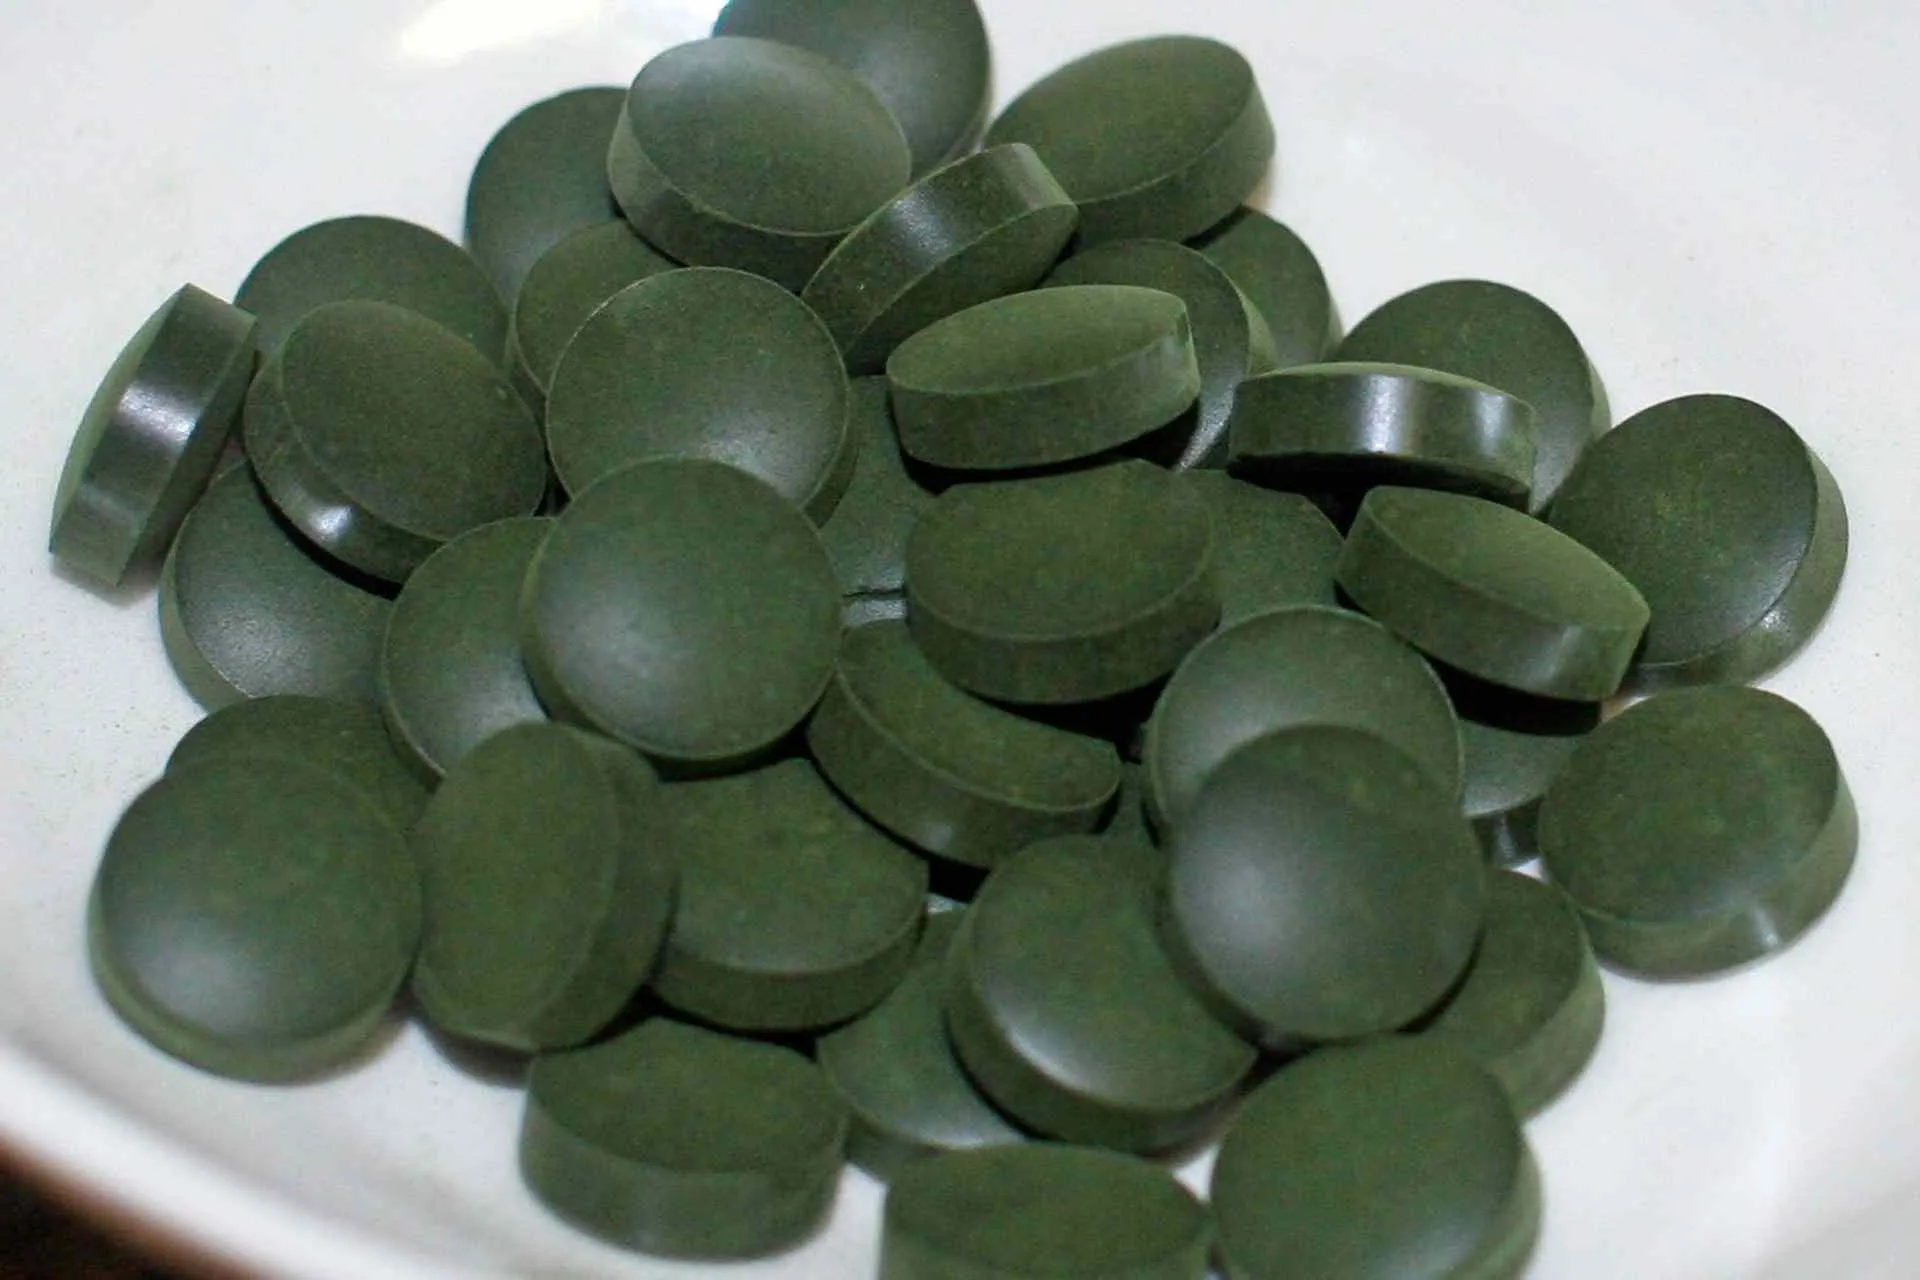 It is actually quite amazing how nutritious Spirulina is.